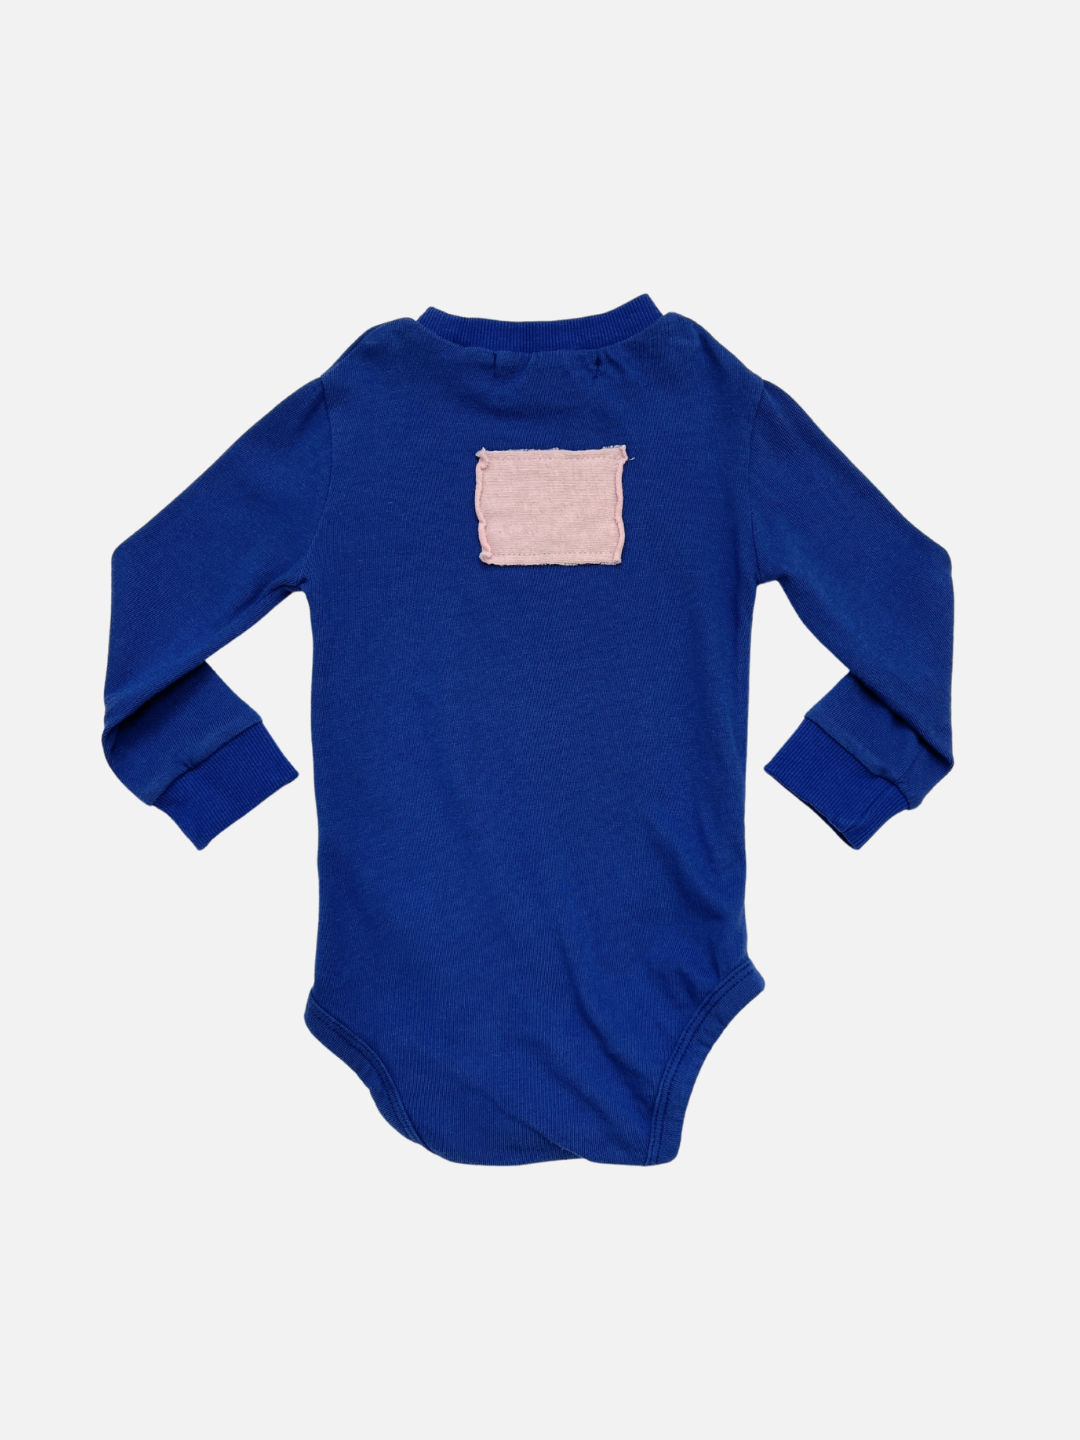 Blue | Back view of the patch onesie in Blue with pink rectangular patch on the back